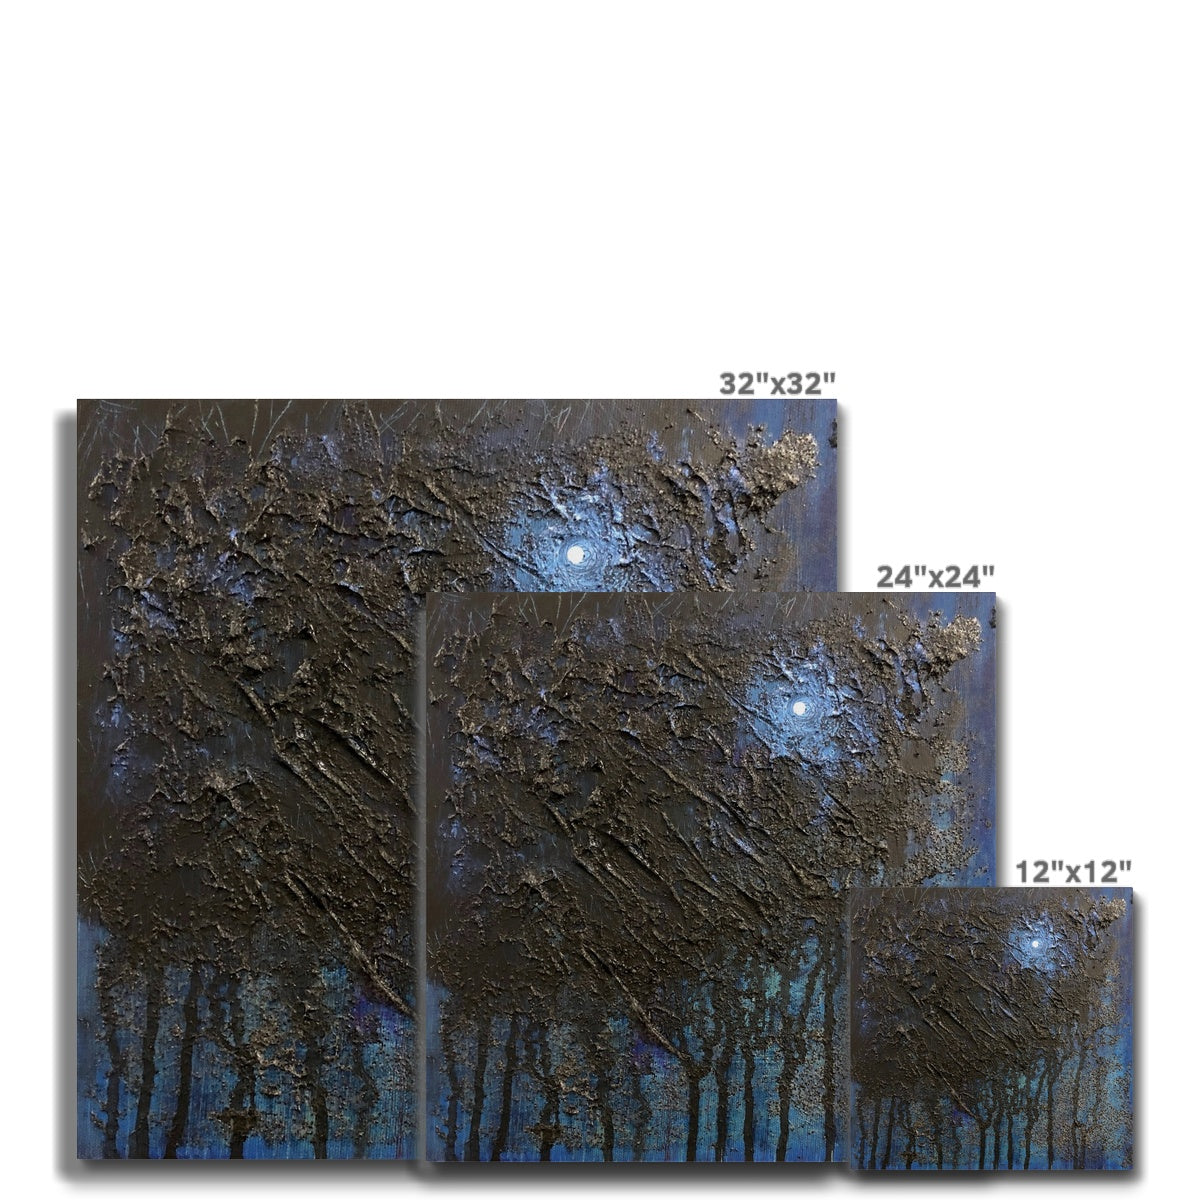 The Blue Moon Wood Abstract Painting | Canvas From Scotland-Contemporary Stretched Canvas Prints-Abstract & Impressionistic Art Gallery-Paintings, Prints, Homeware, Art Gifts From Scotland By Scottish Artist Kevin Hunter